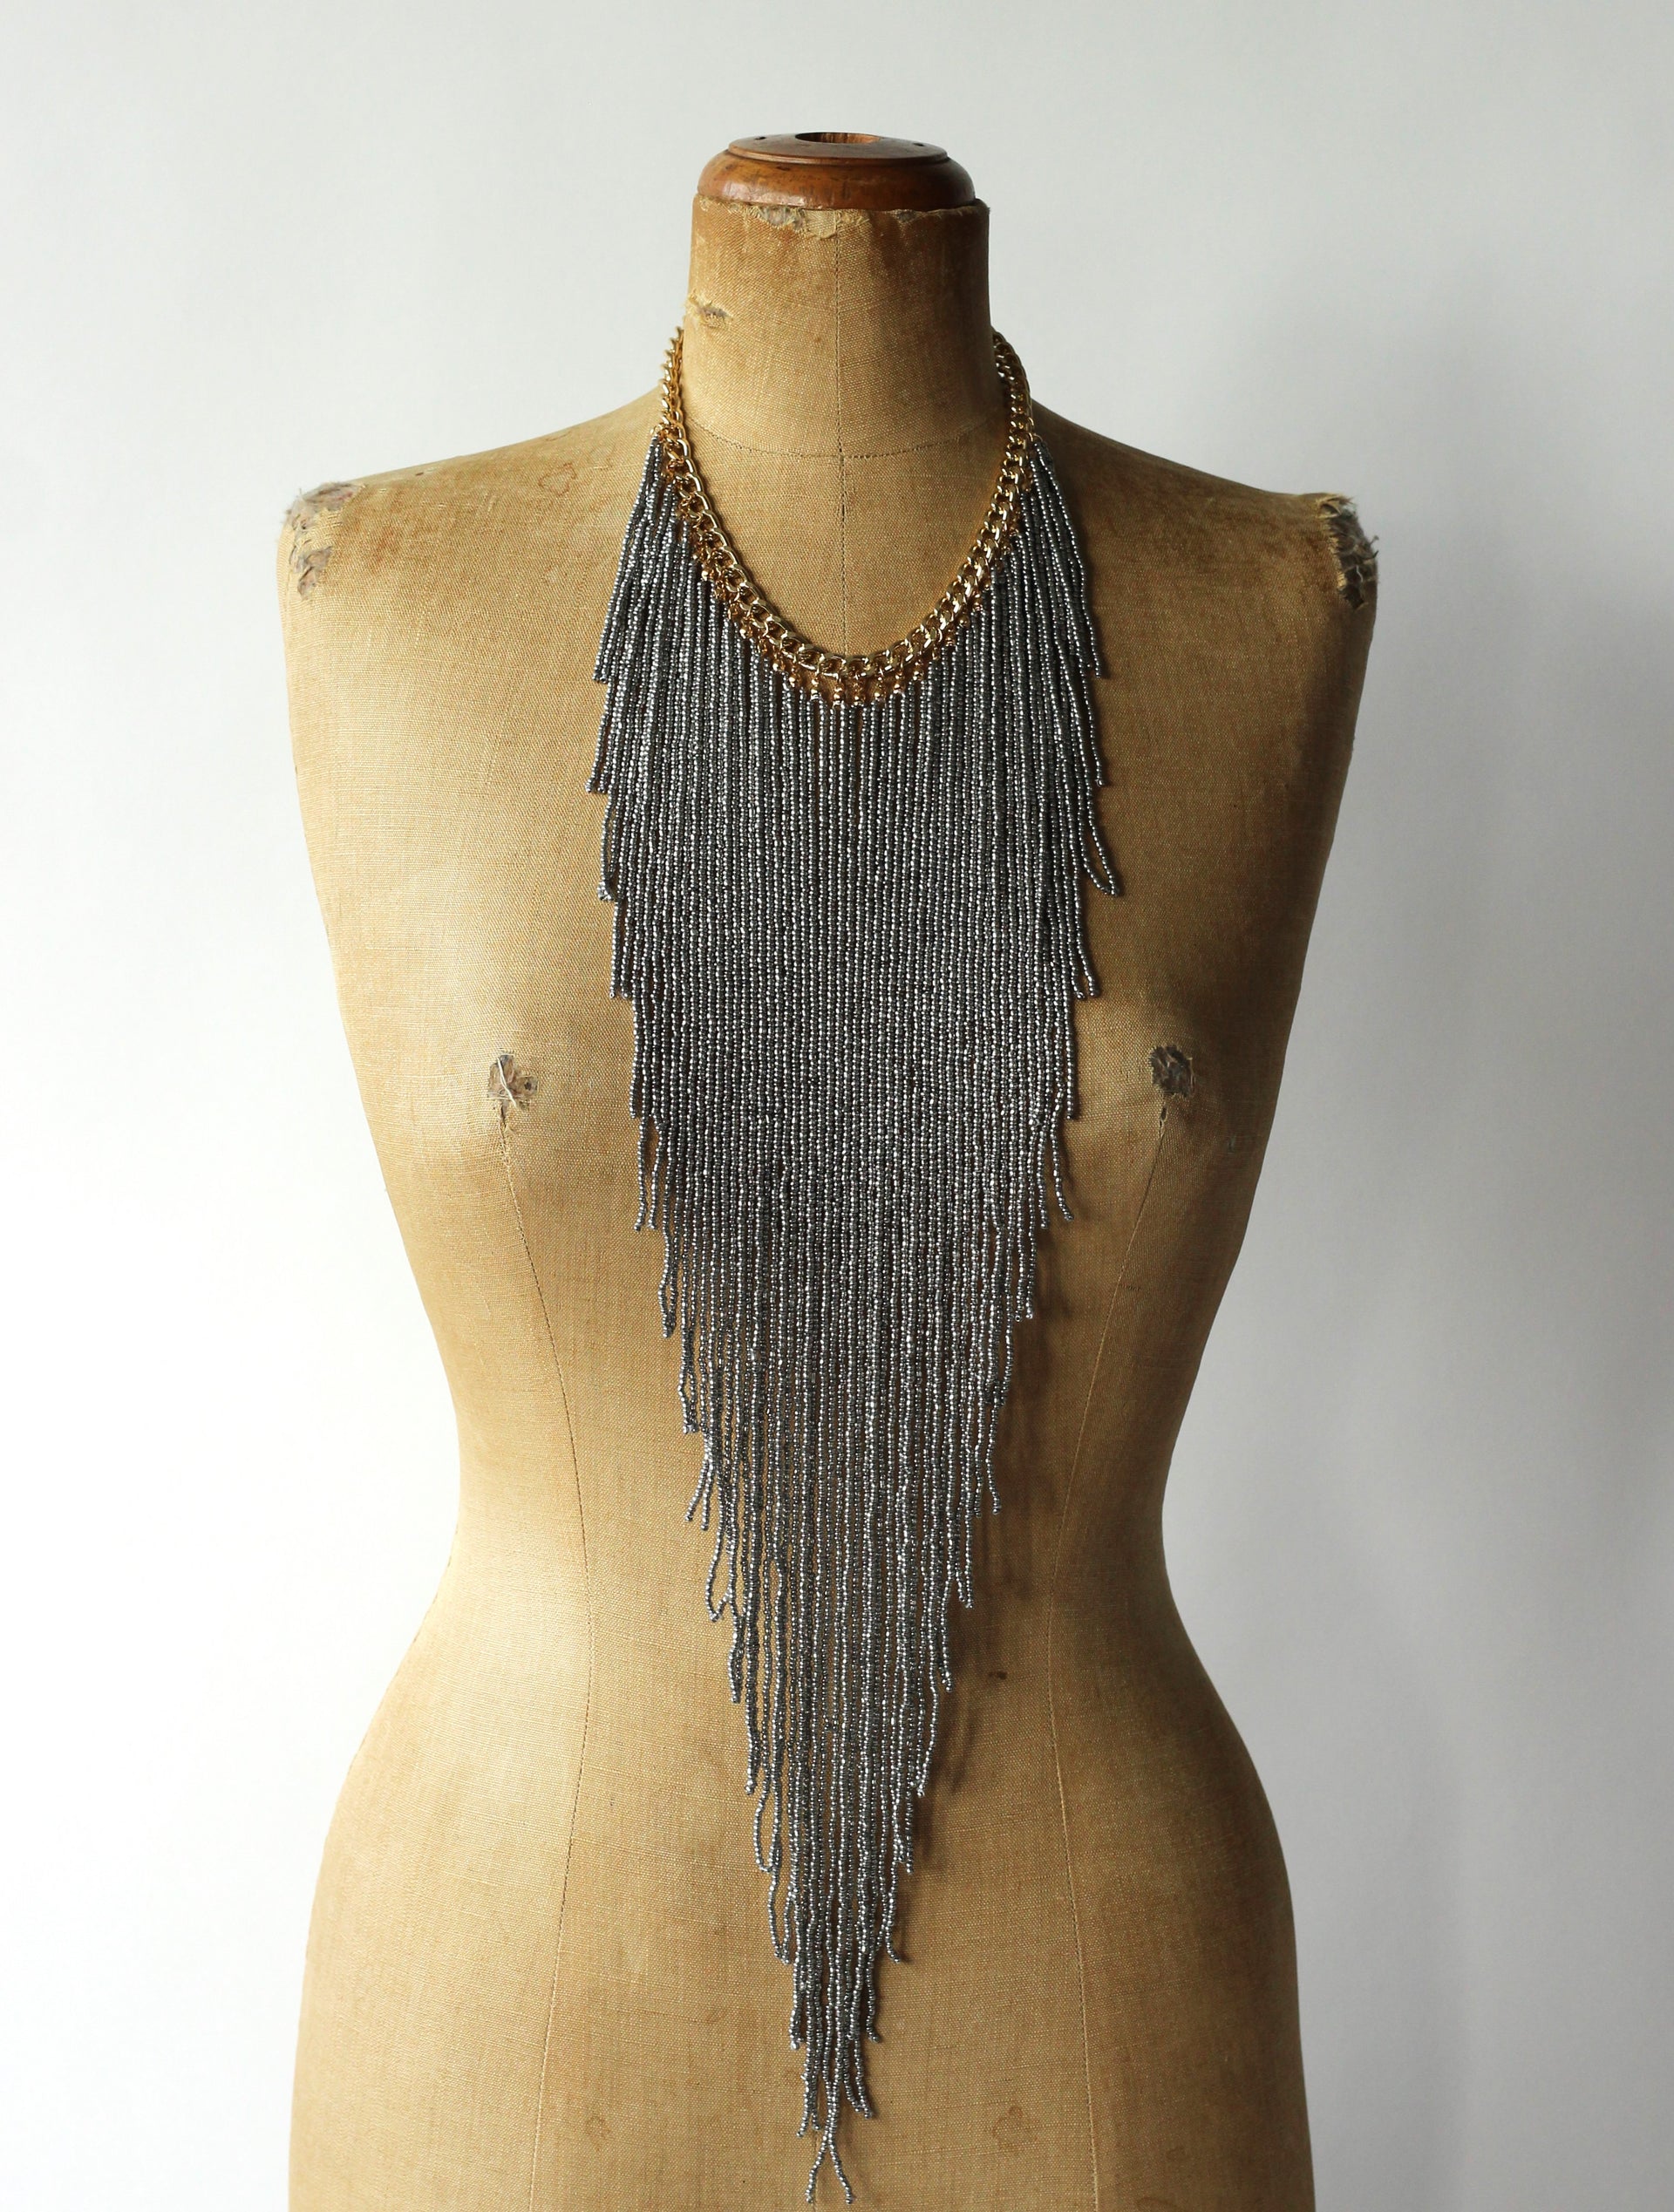 Long Necklace with Silver Glass Beads.